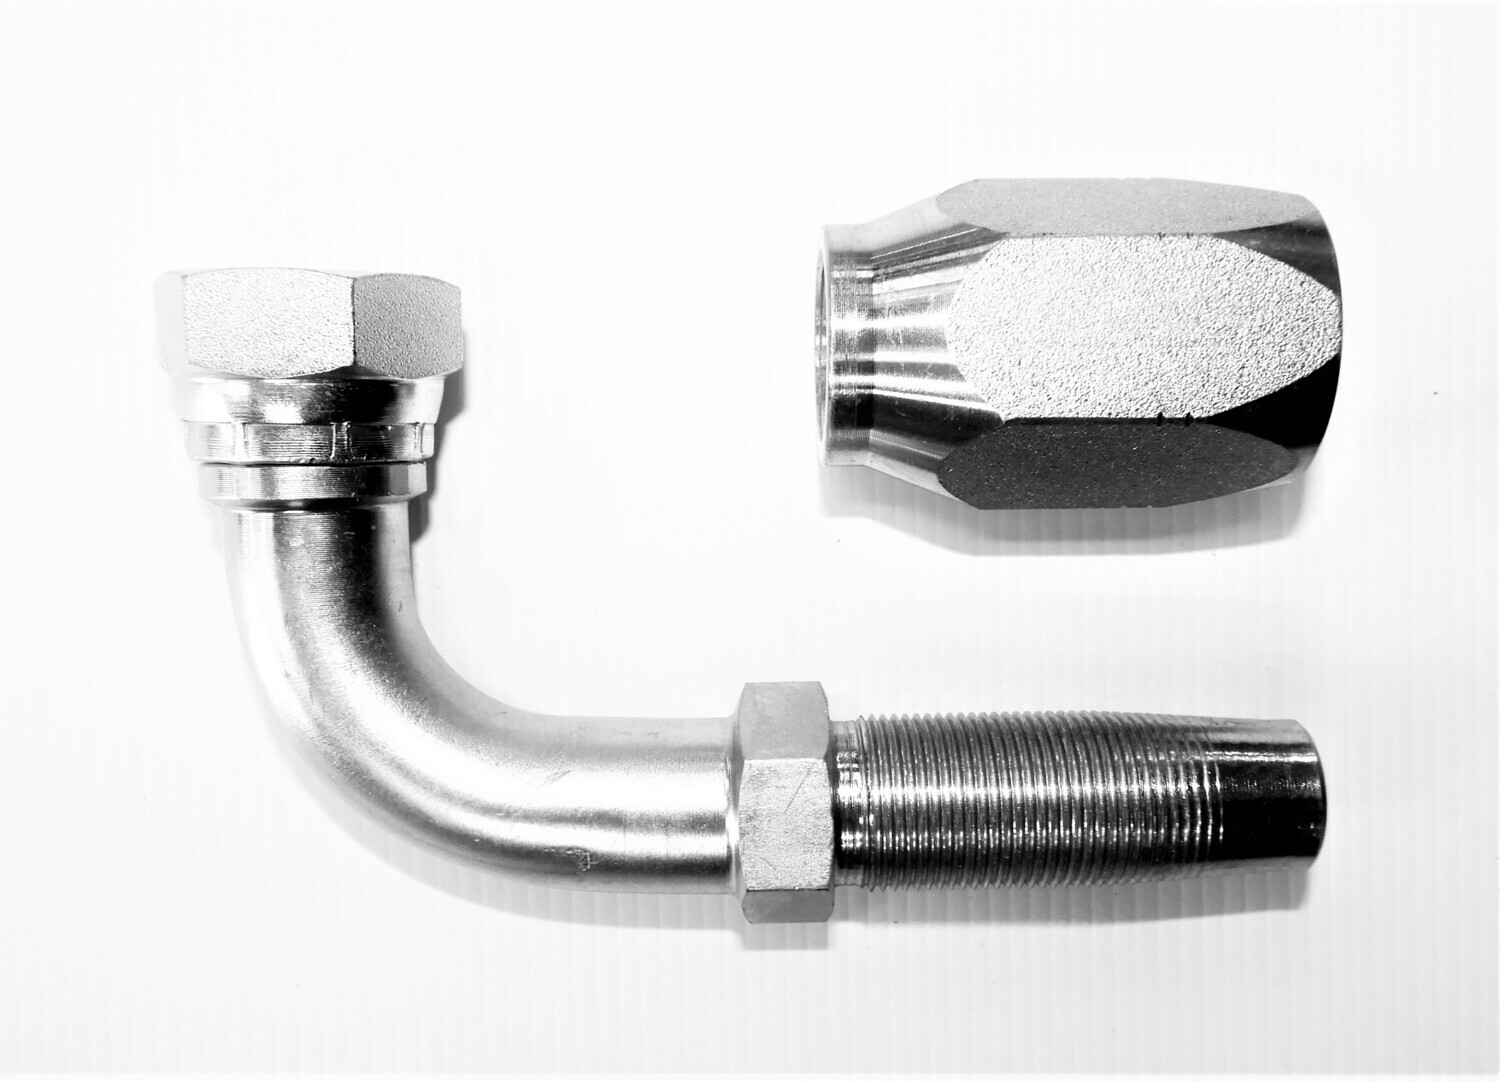 set of 90-degree JIC Field Fit Reusable Hydraulic Hose Fittings with swept bend elbow.